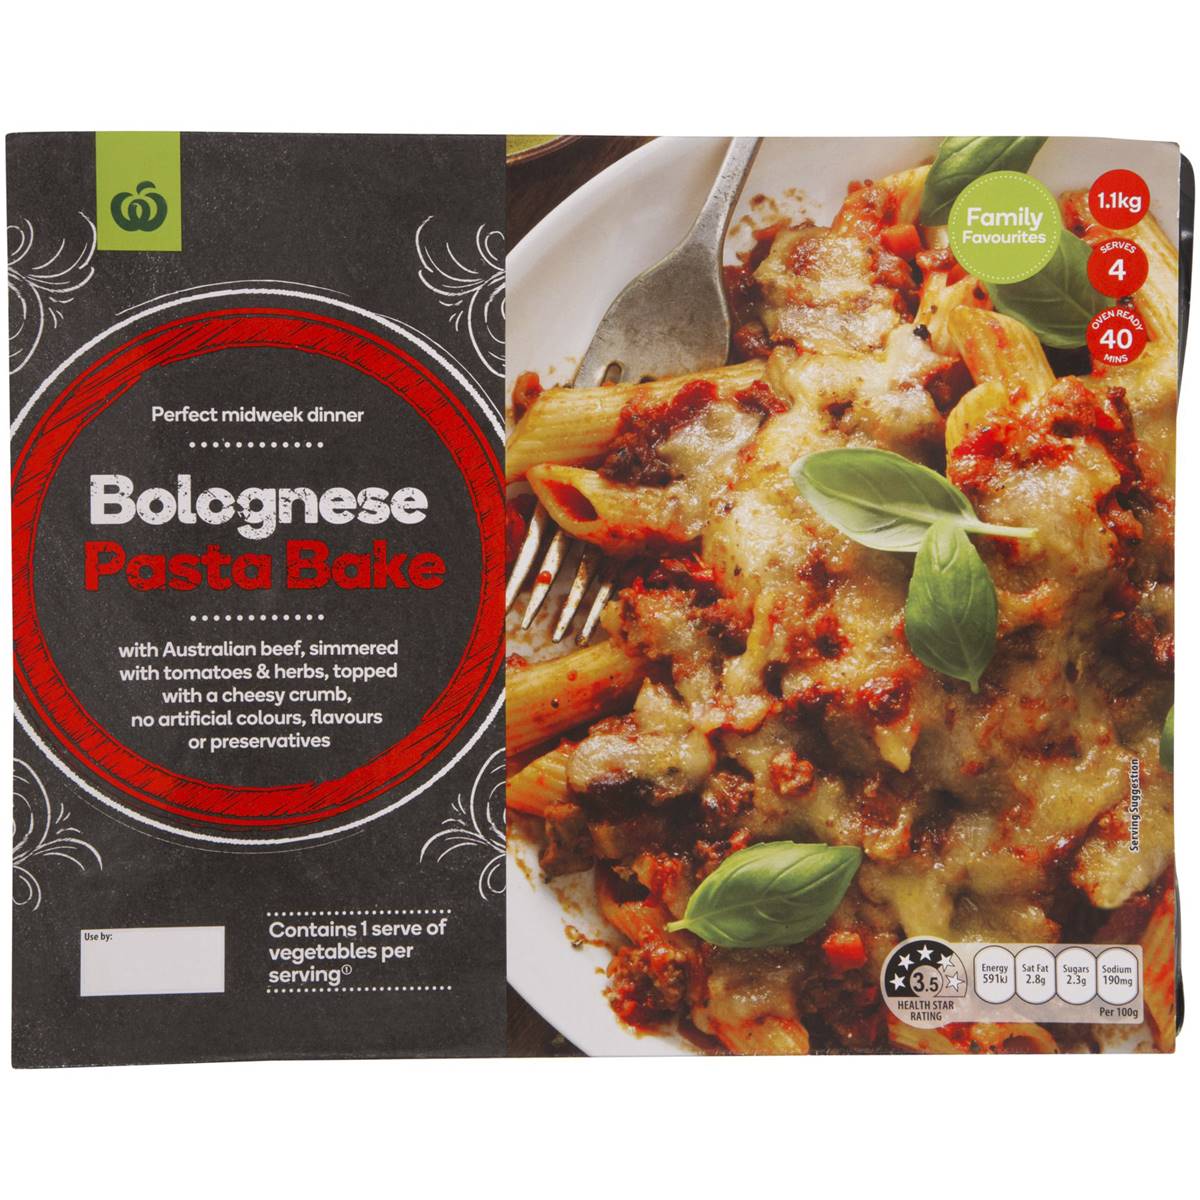 Woolworths Penne Pasta Bolognese